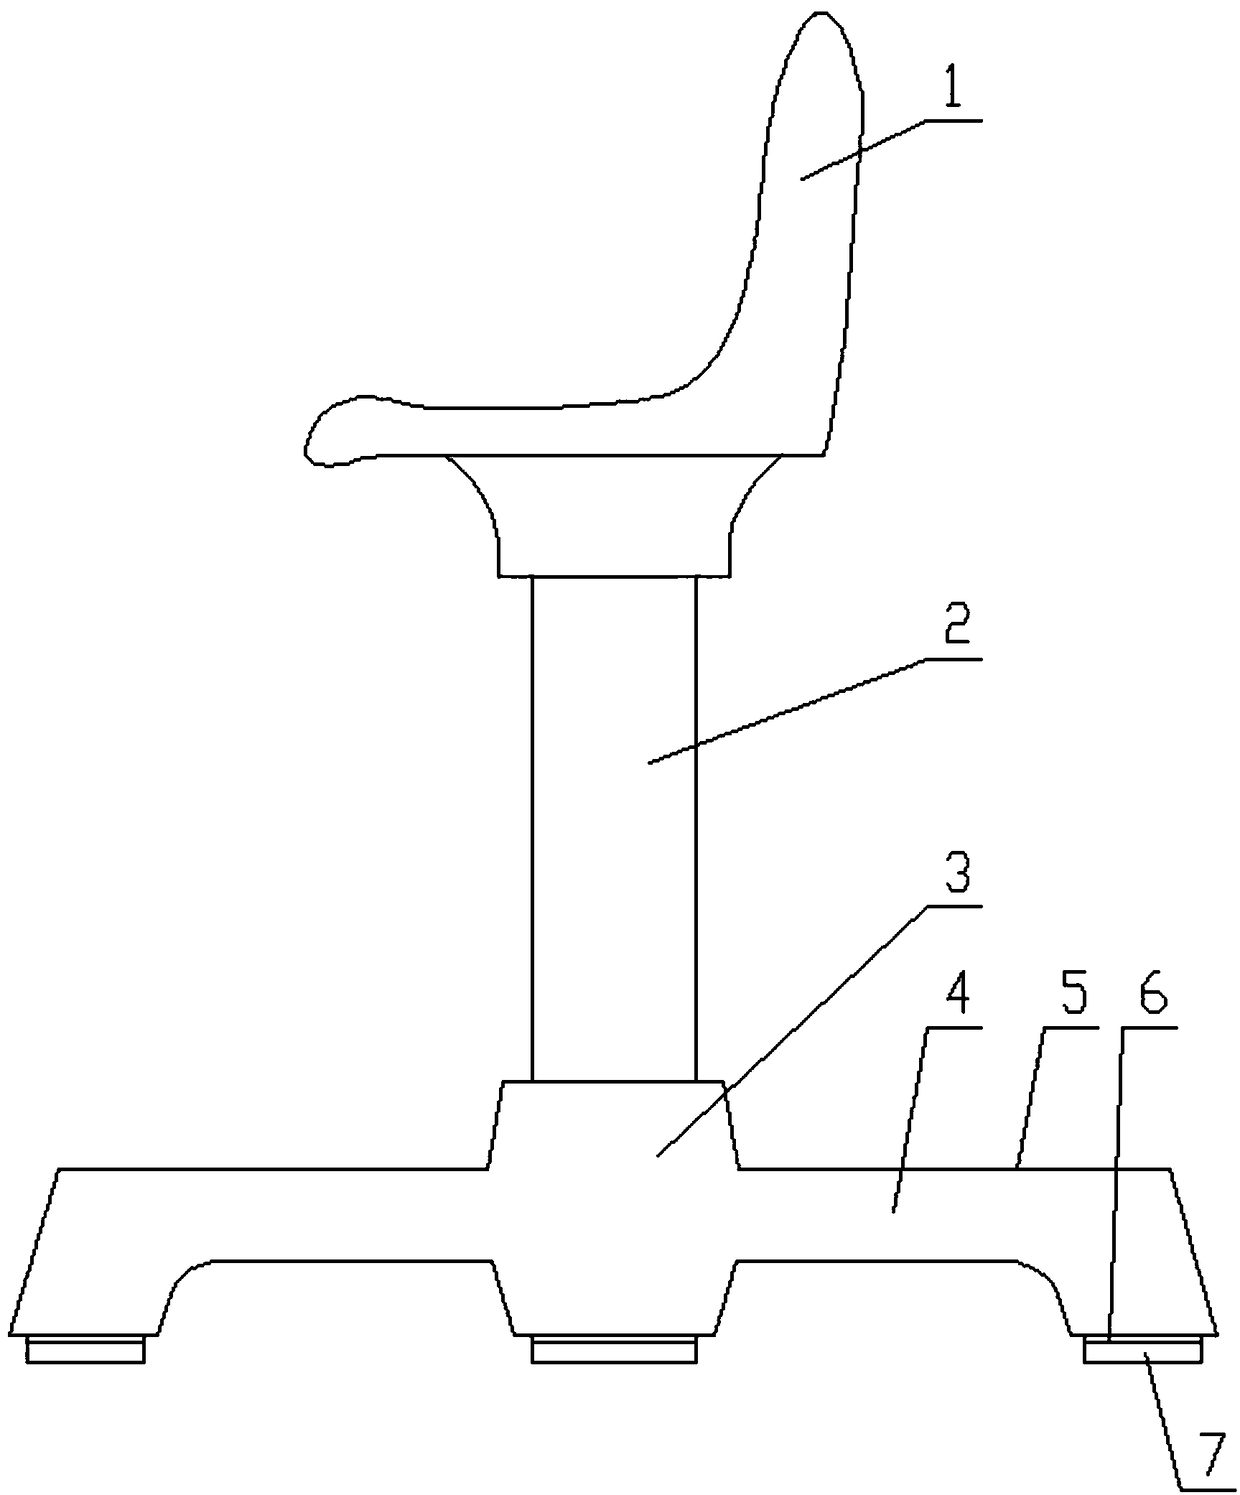 VR equipment supporting seat